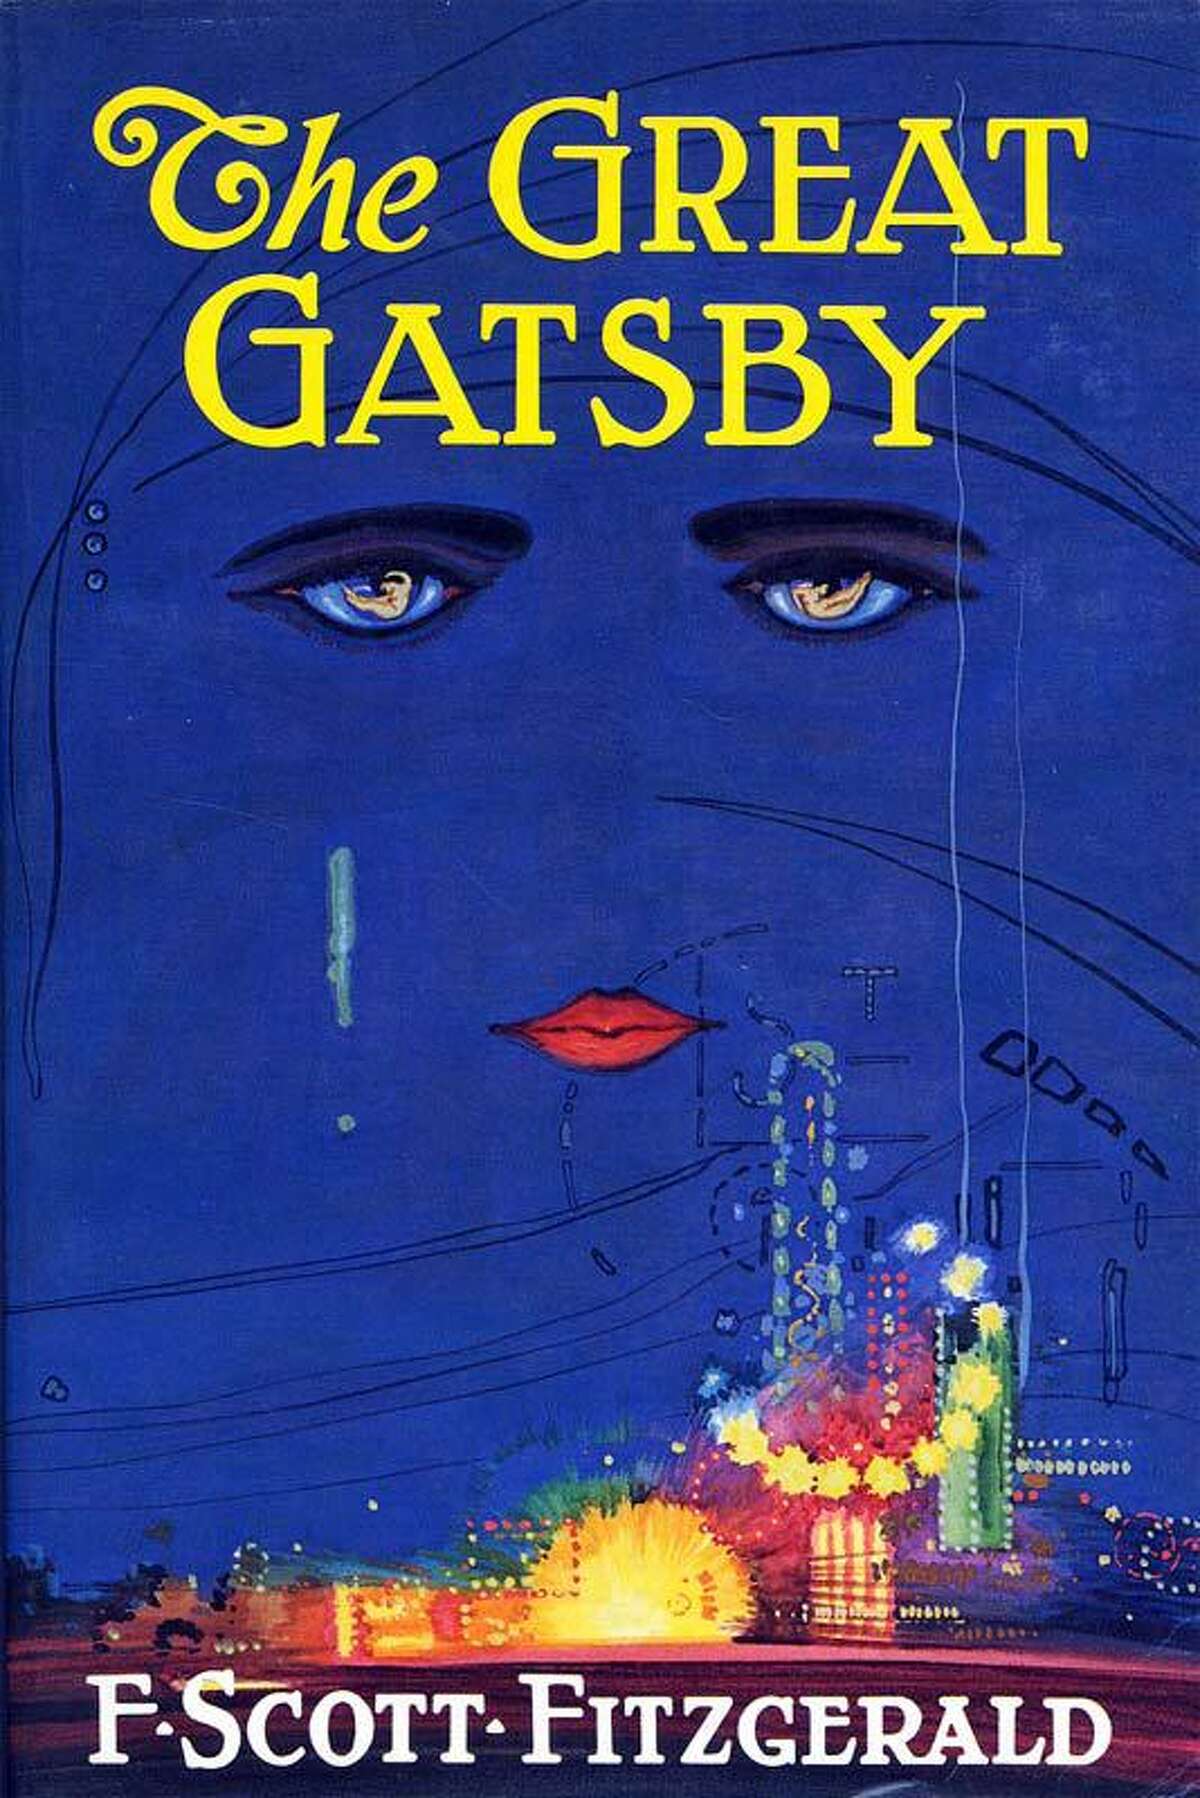 “The Great Gatsby” is F. Scott Fitzgerald’s classic novel about a stalled love story between Jay Gatsby and Daisy Buchanan that takes place during the 1920s.